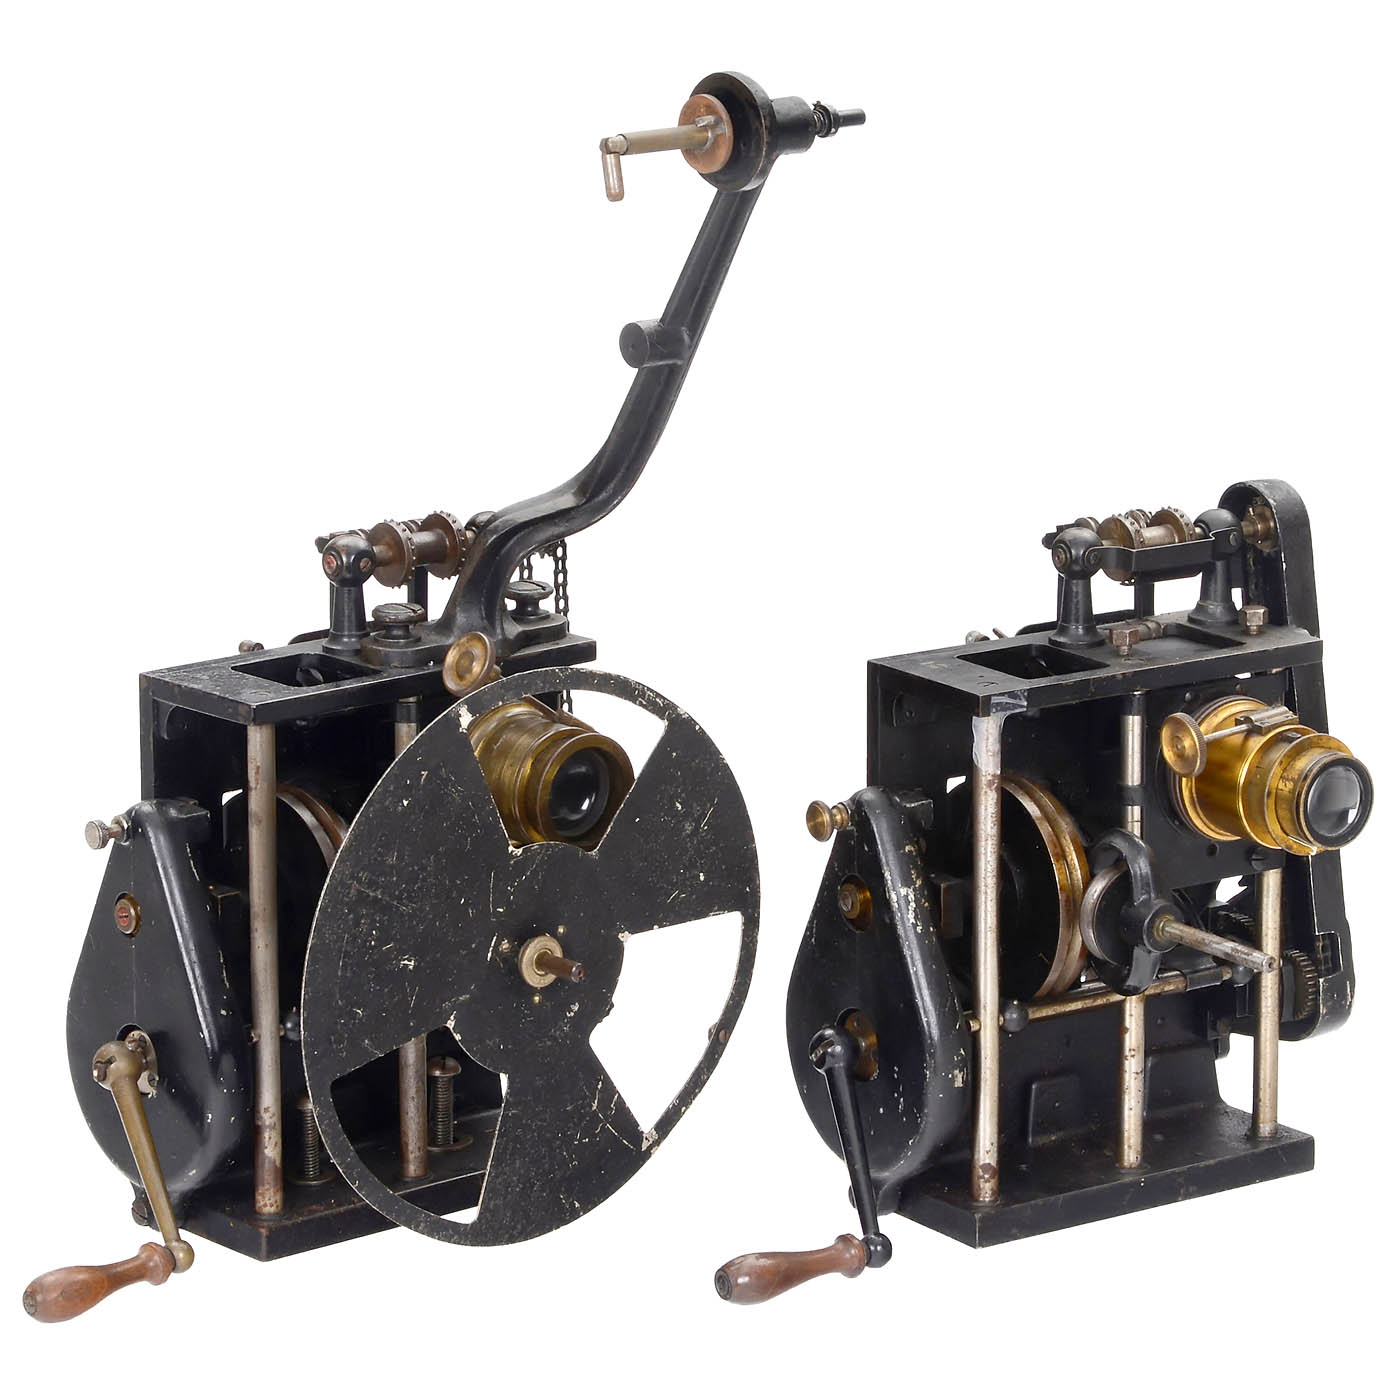 2 Pathé Film Projection Heads, c. 1914 - Image 2 of 3